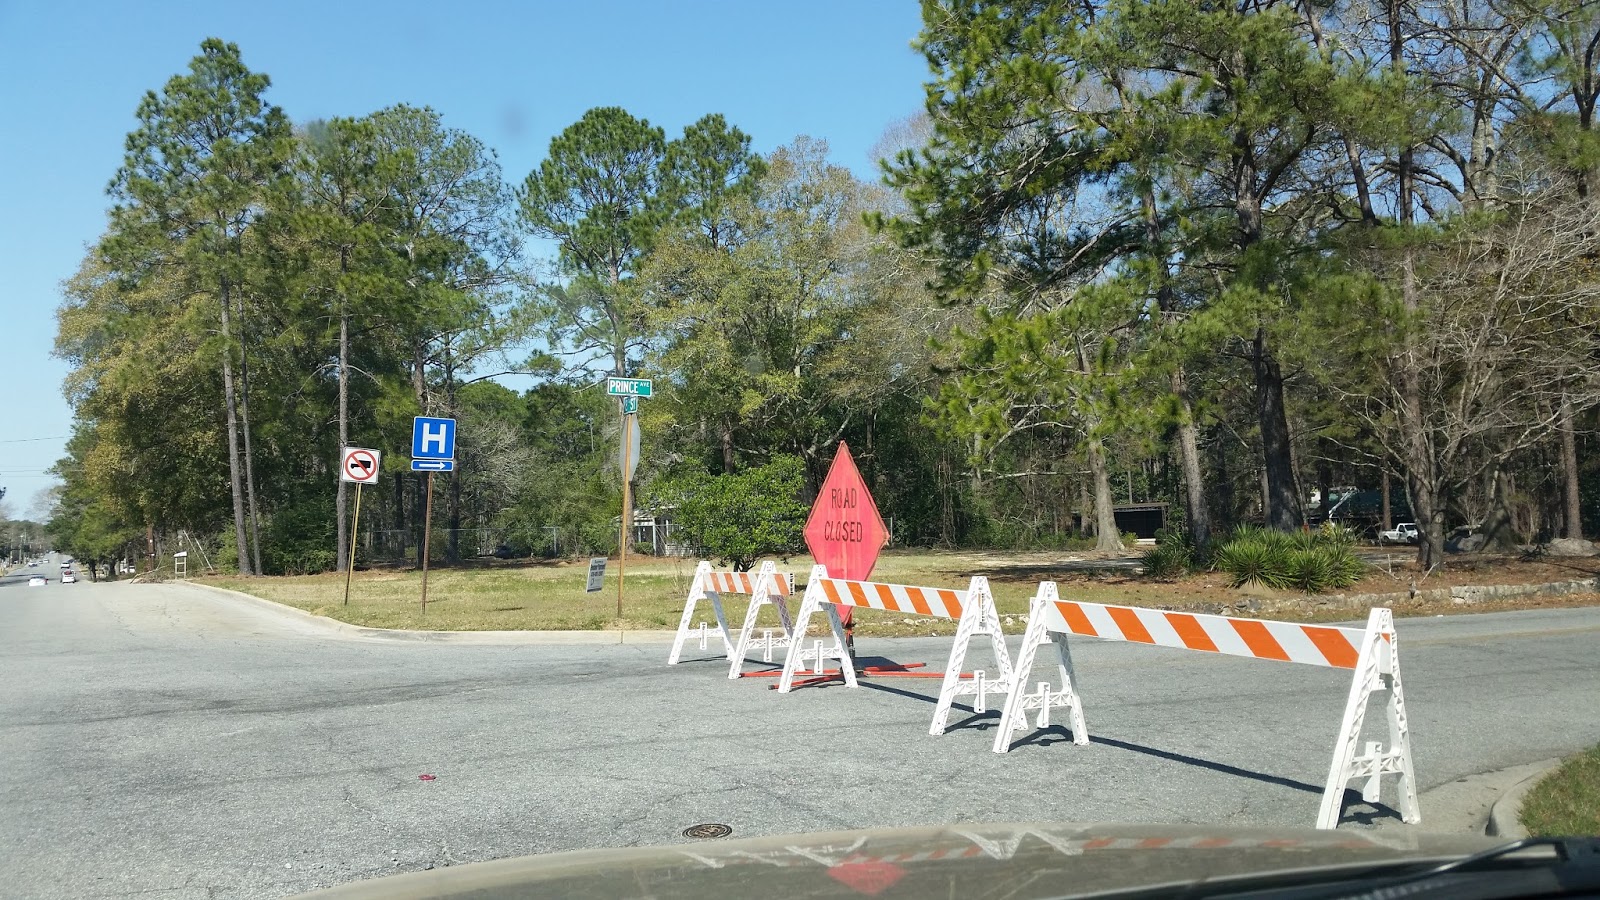 Tiftarea News: Utility Work Being Done On Prince Ave./Old Ocilla Road Today1600 x 900